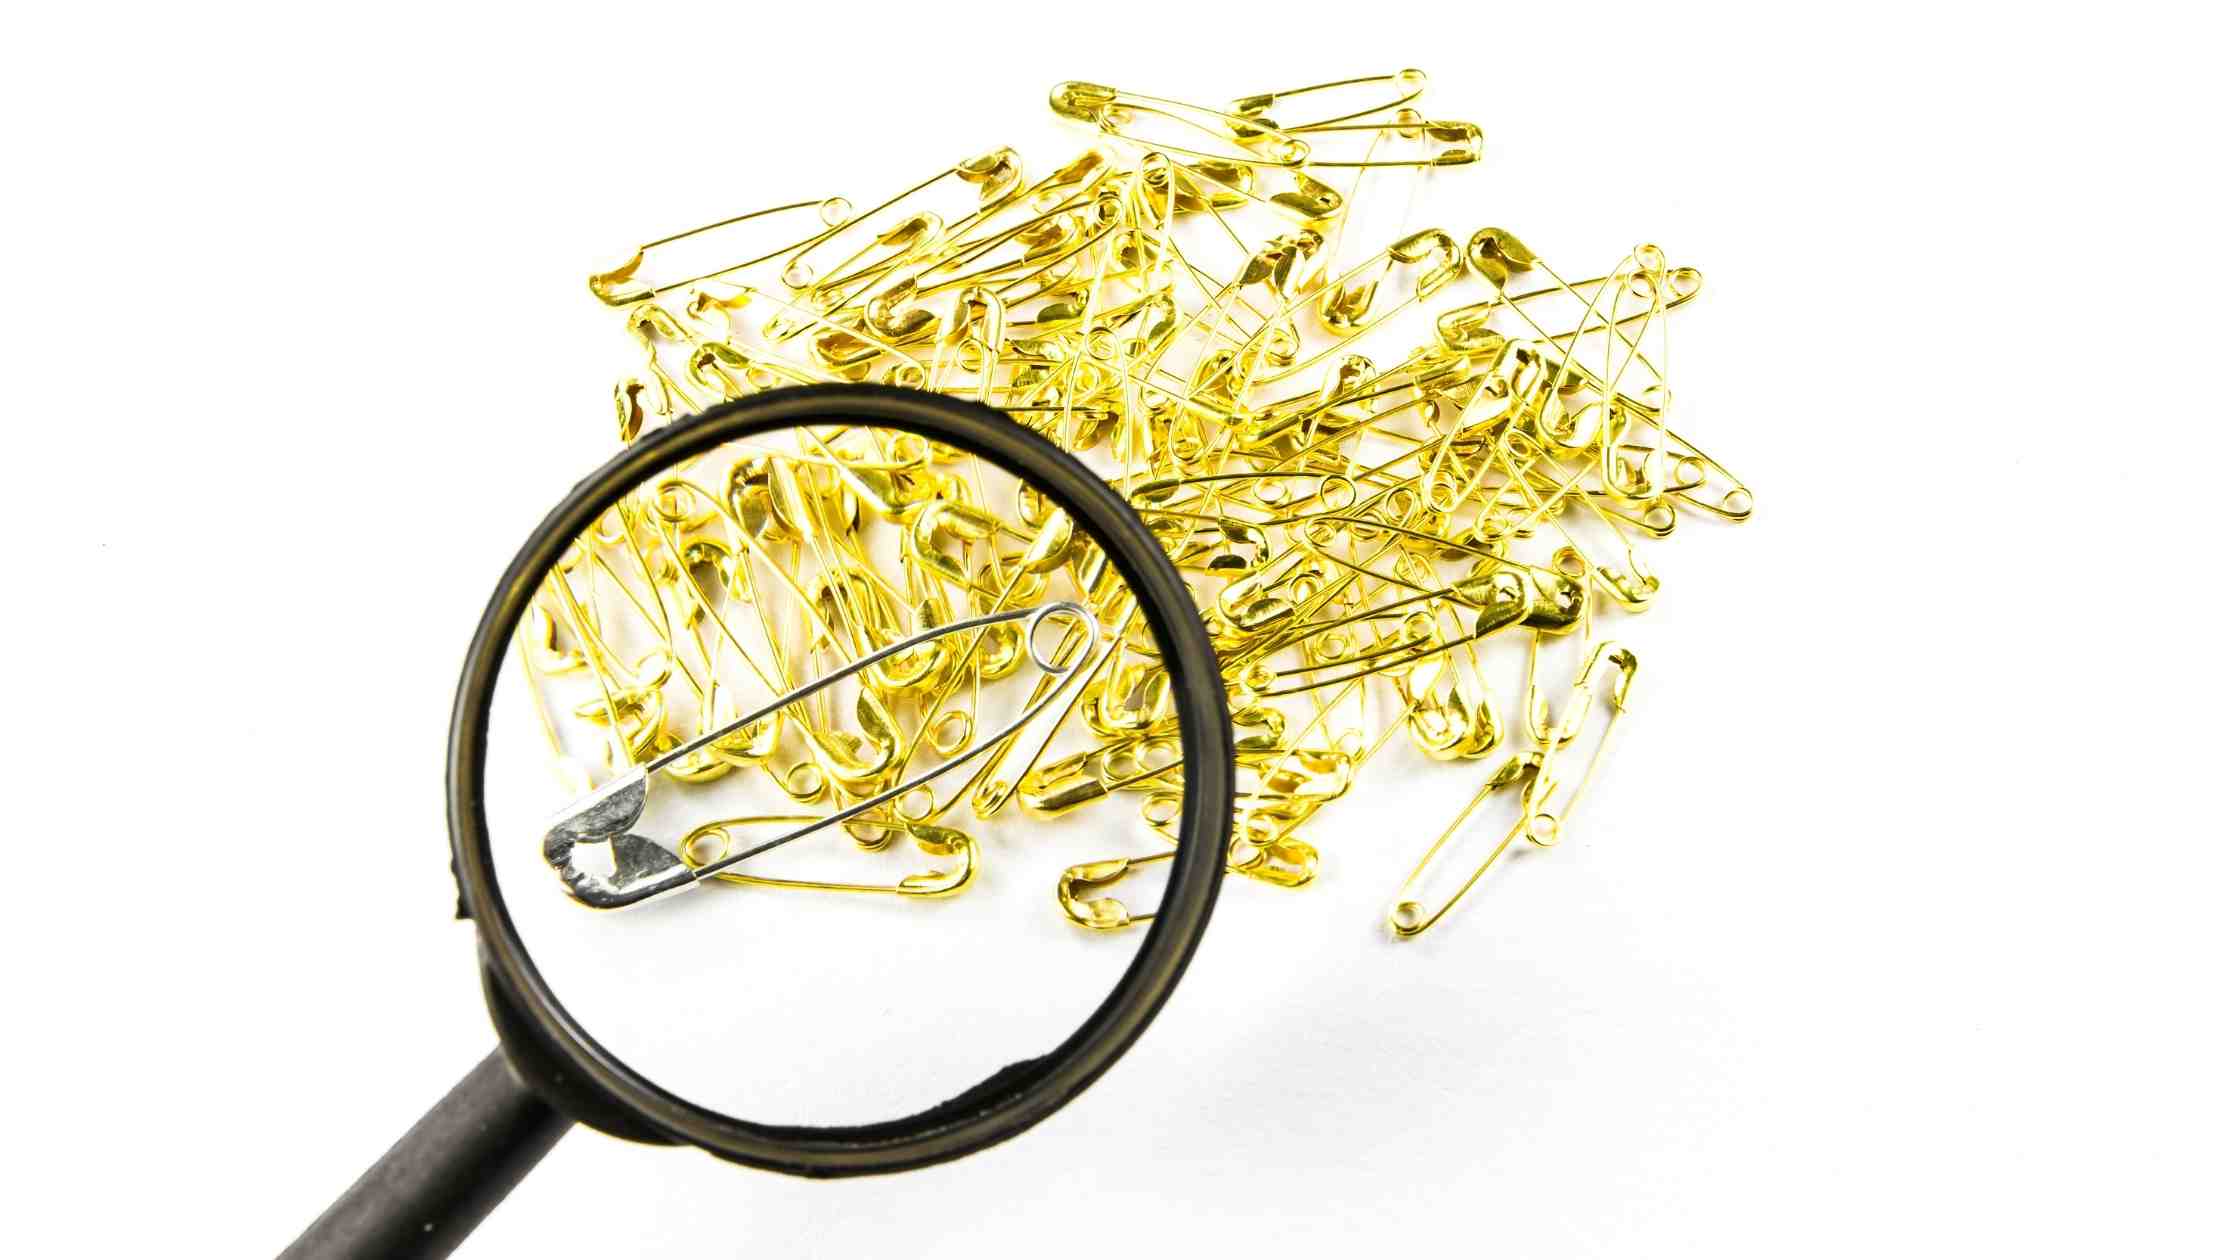 Safety pins and magnifying glass on a white background